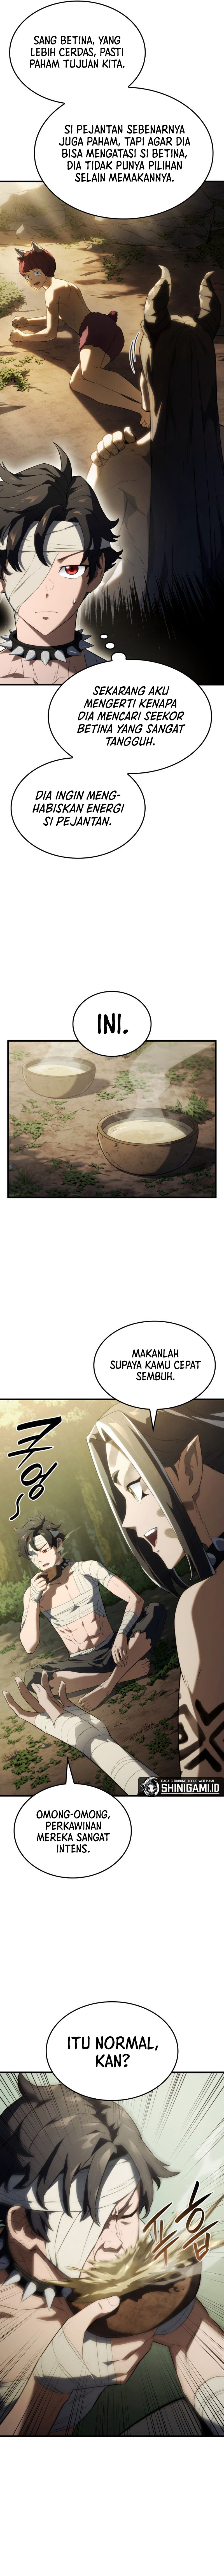 id-revenge-of-the-iron-blooded-sword-hound Chapter 35